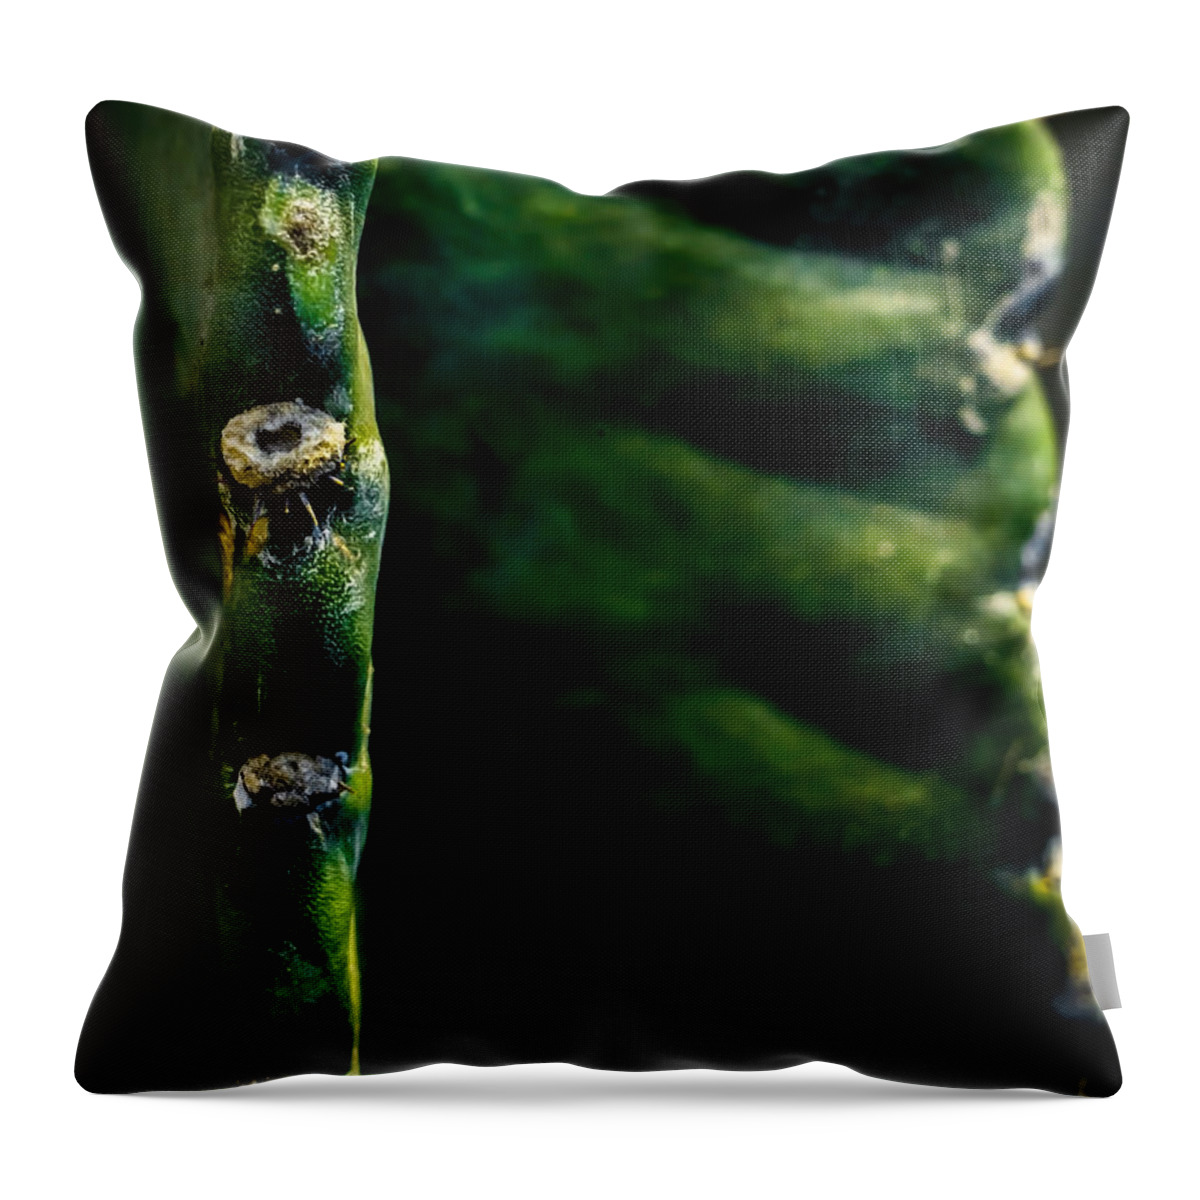 Leaf Throw Pillow featuring the photograph Cactus Abstract by James Aiken